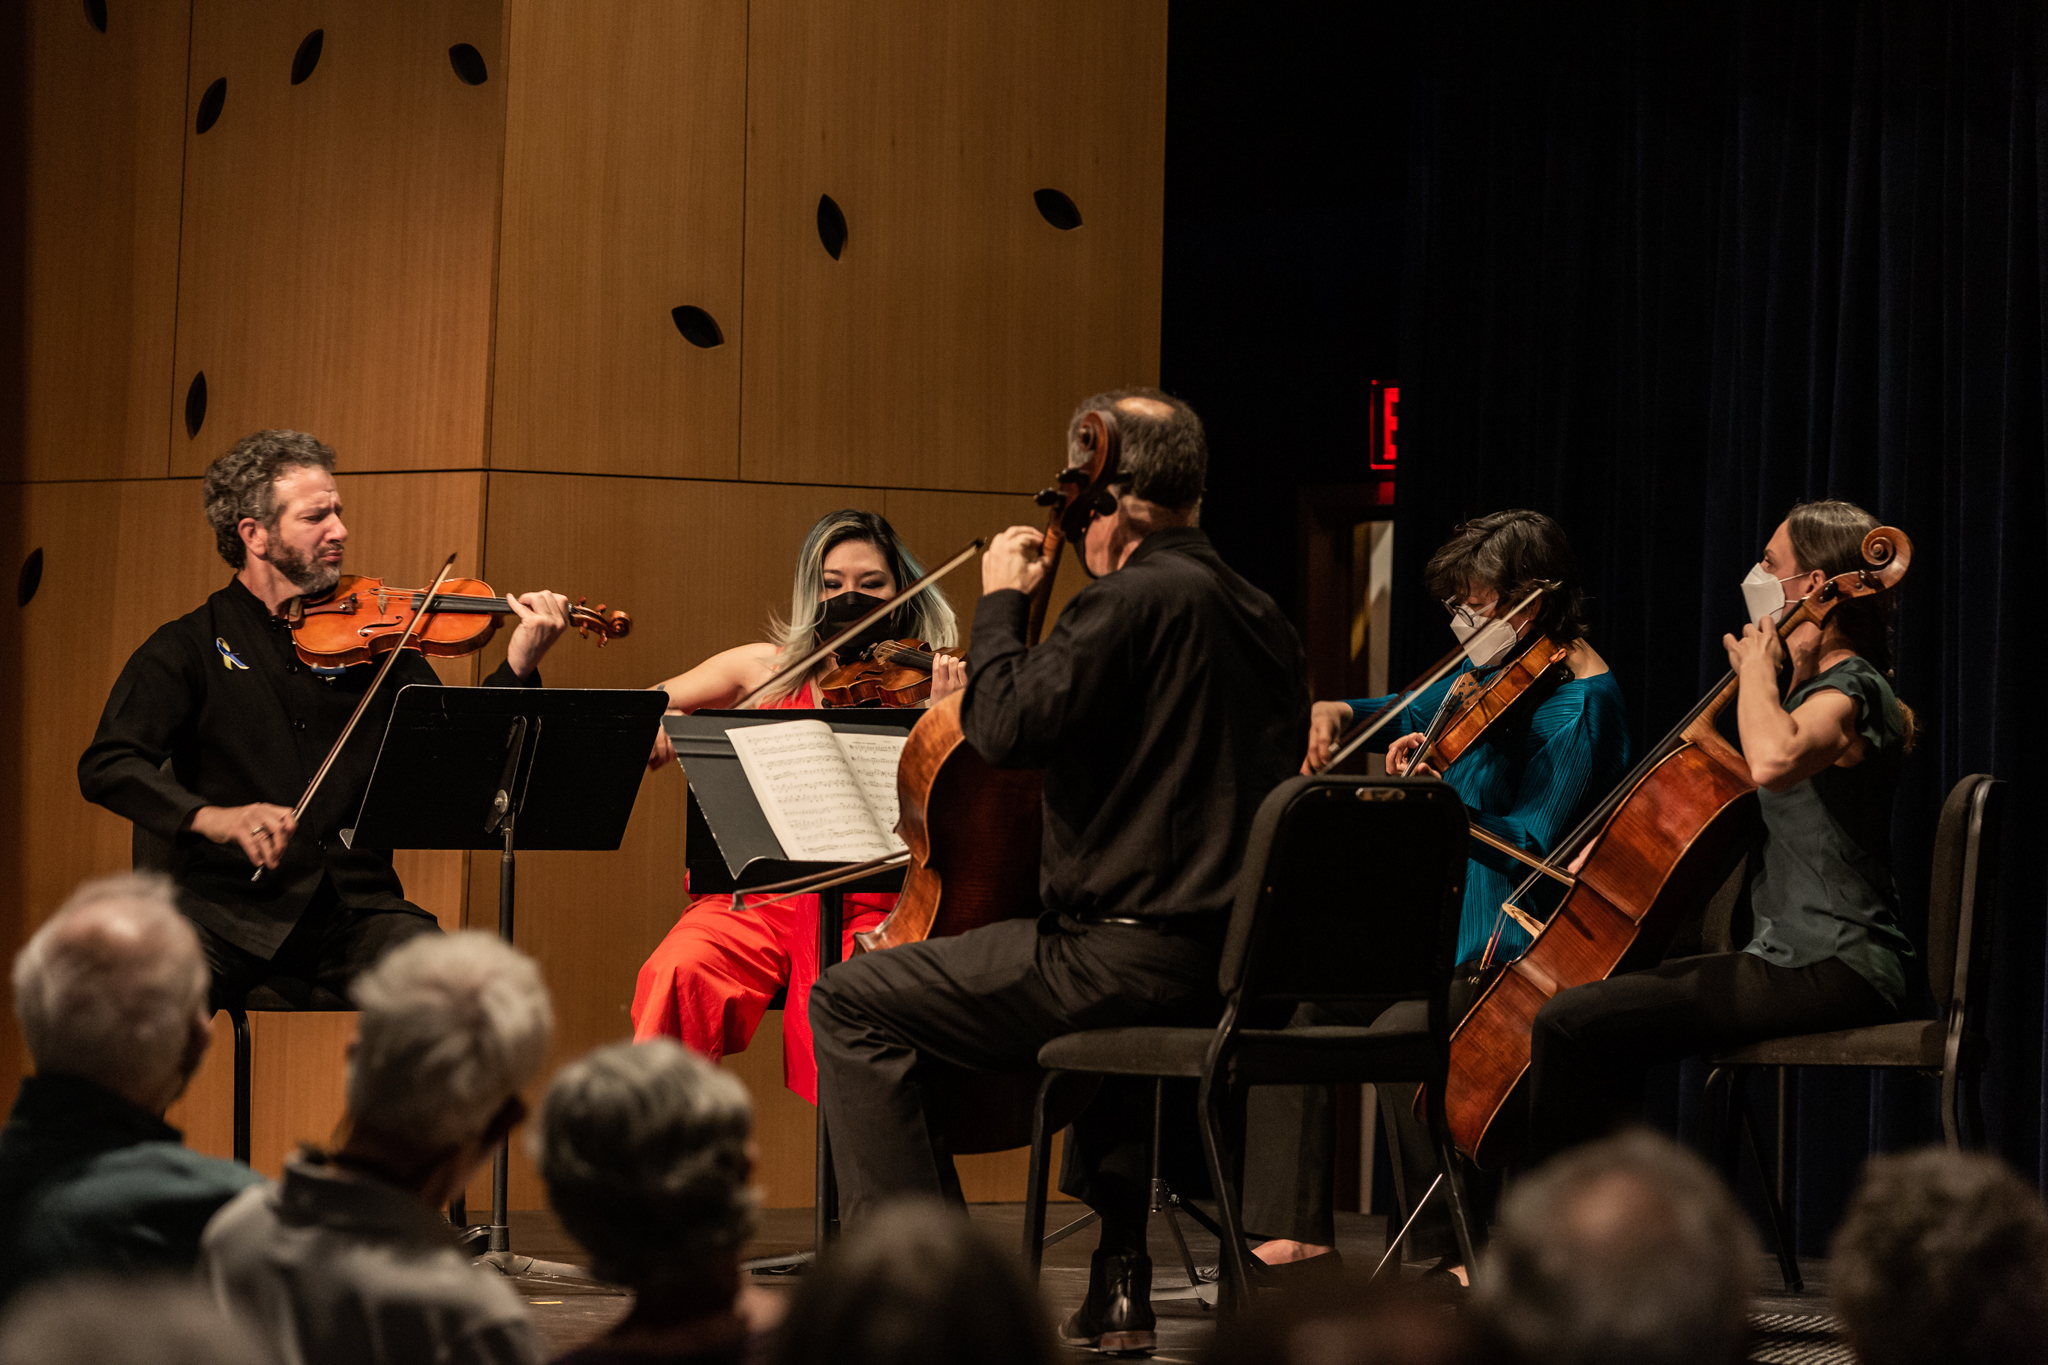 Close up of two violinists, a violist, and two cellists performing on stage.